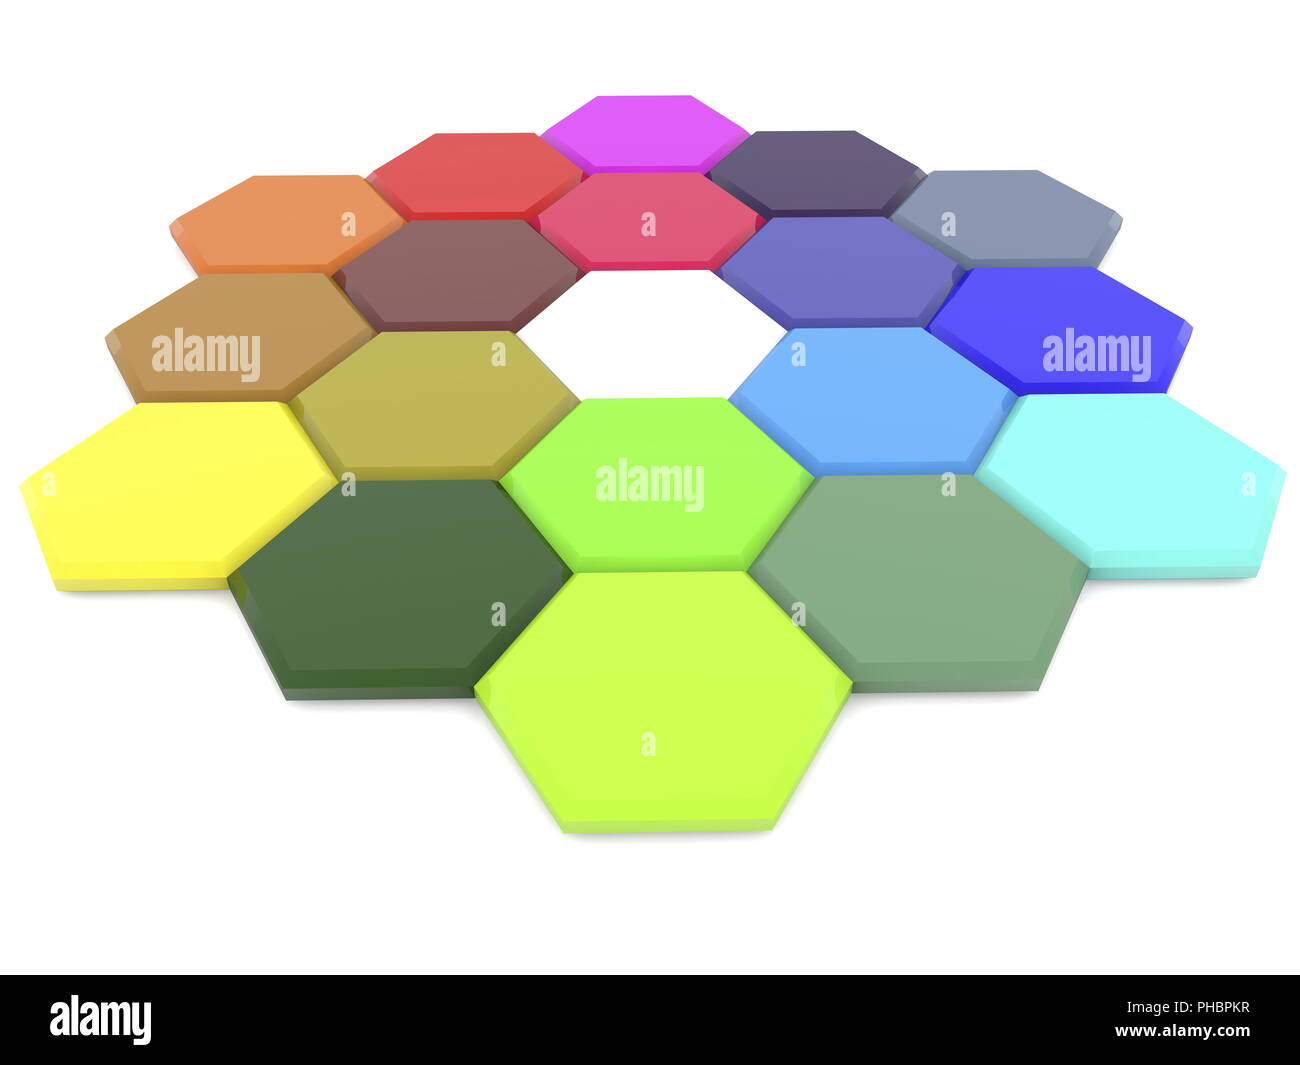 Polygons in different colors on white Stock Photo